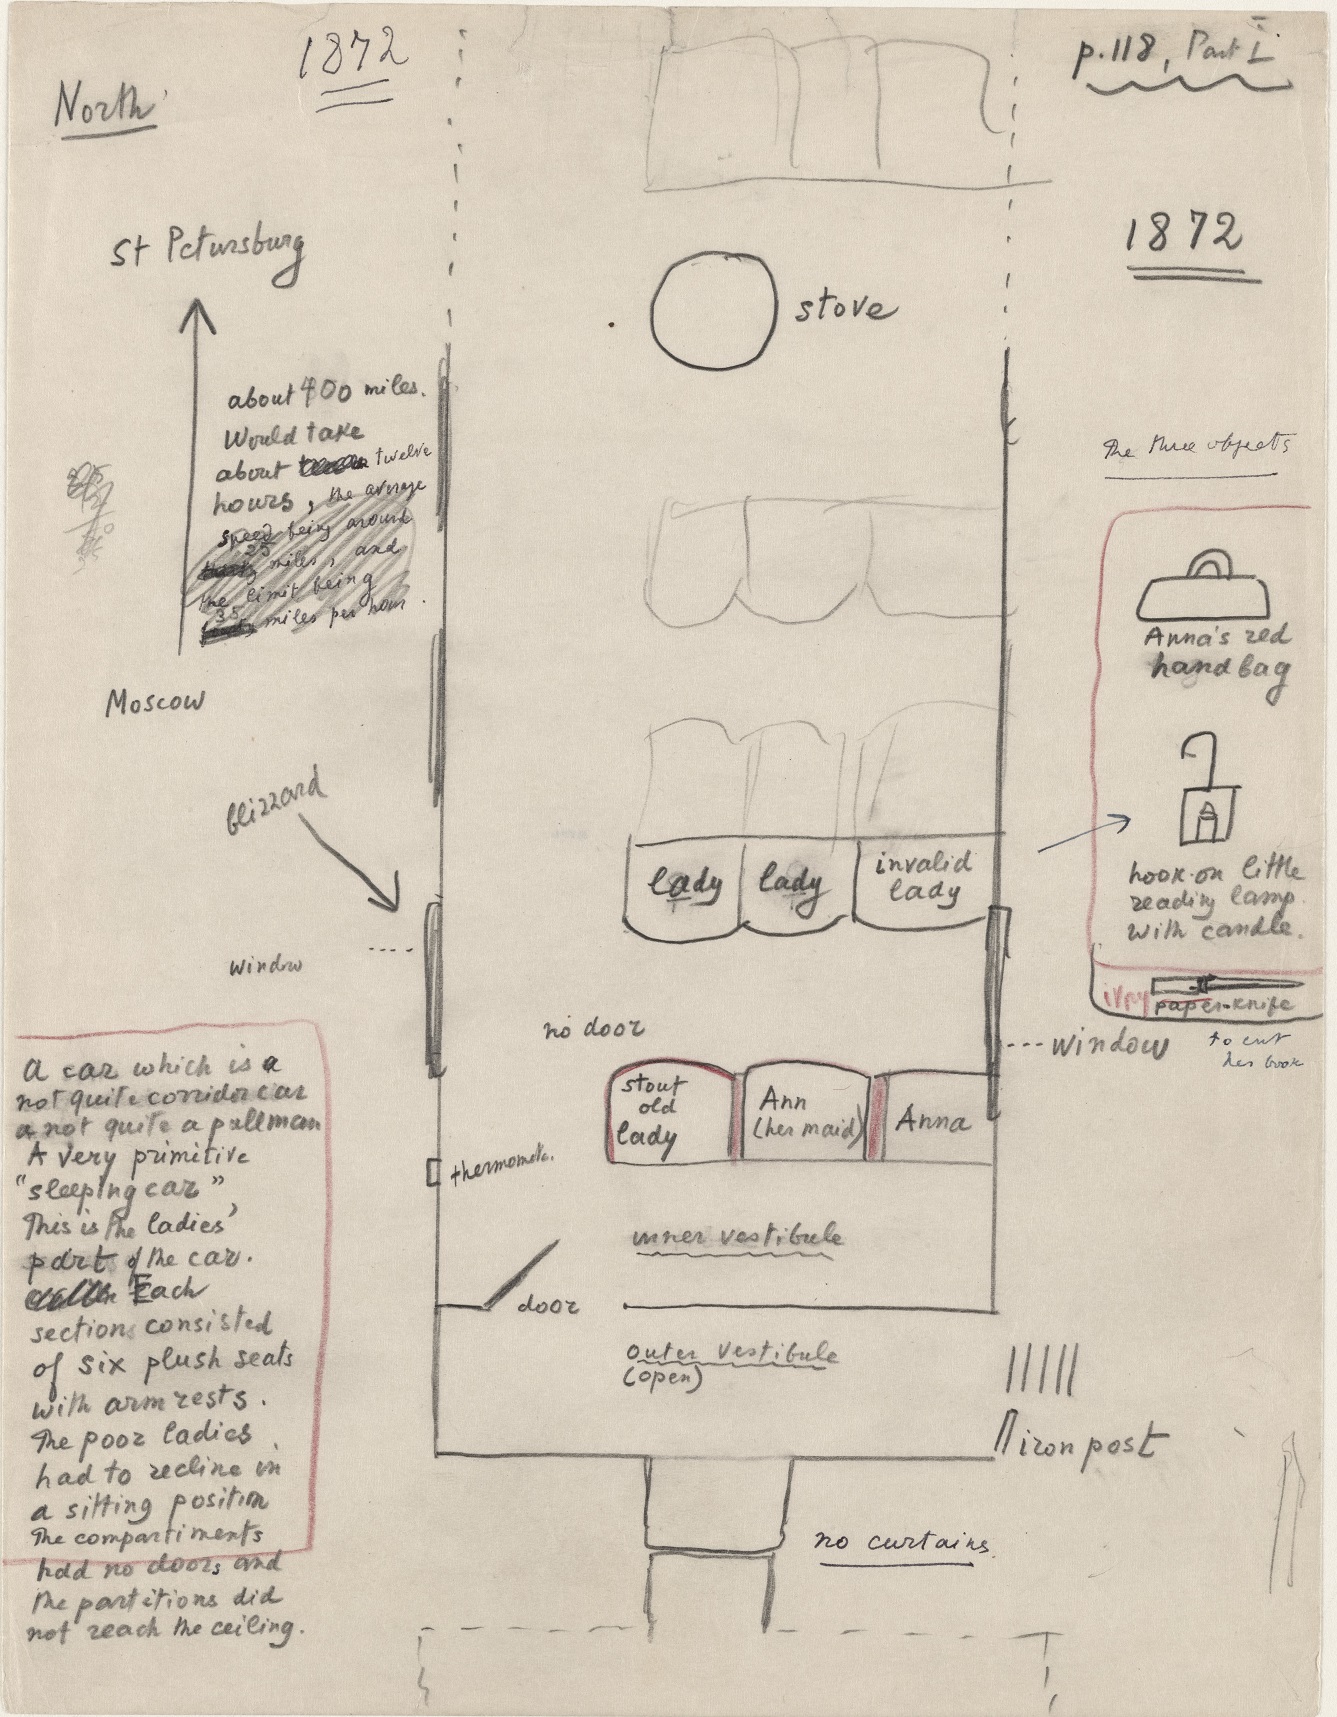 Nabokov's sketch of the train-car layout